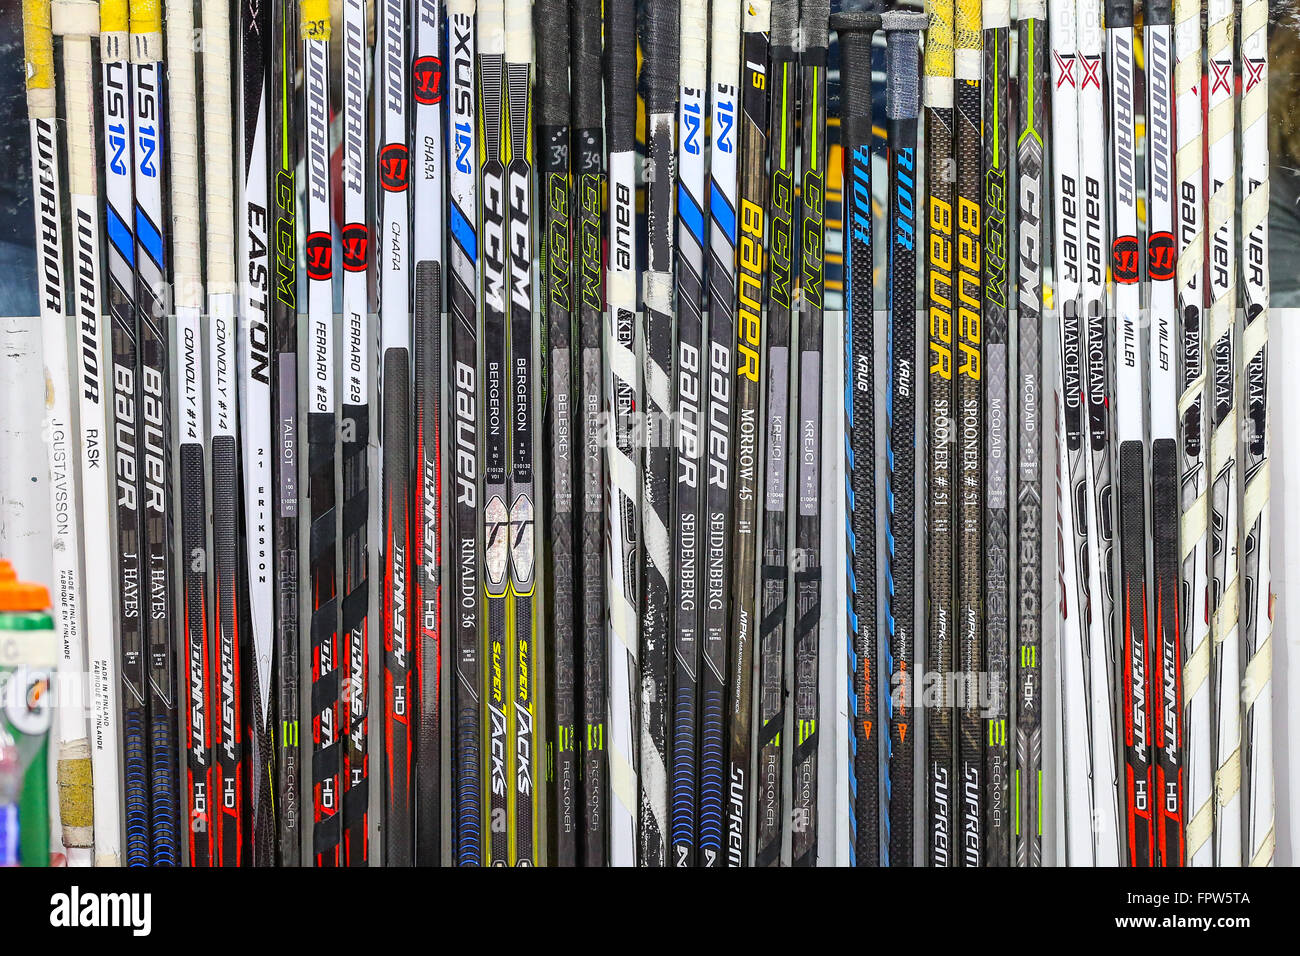 Boston Bruins hockey sticks during the NHL game between the Boston Bruins and the Carolina Hurricanes at the PNC Arena. Stock Photo